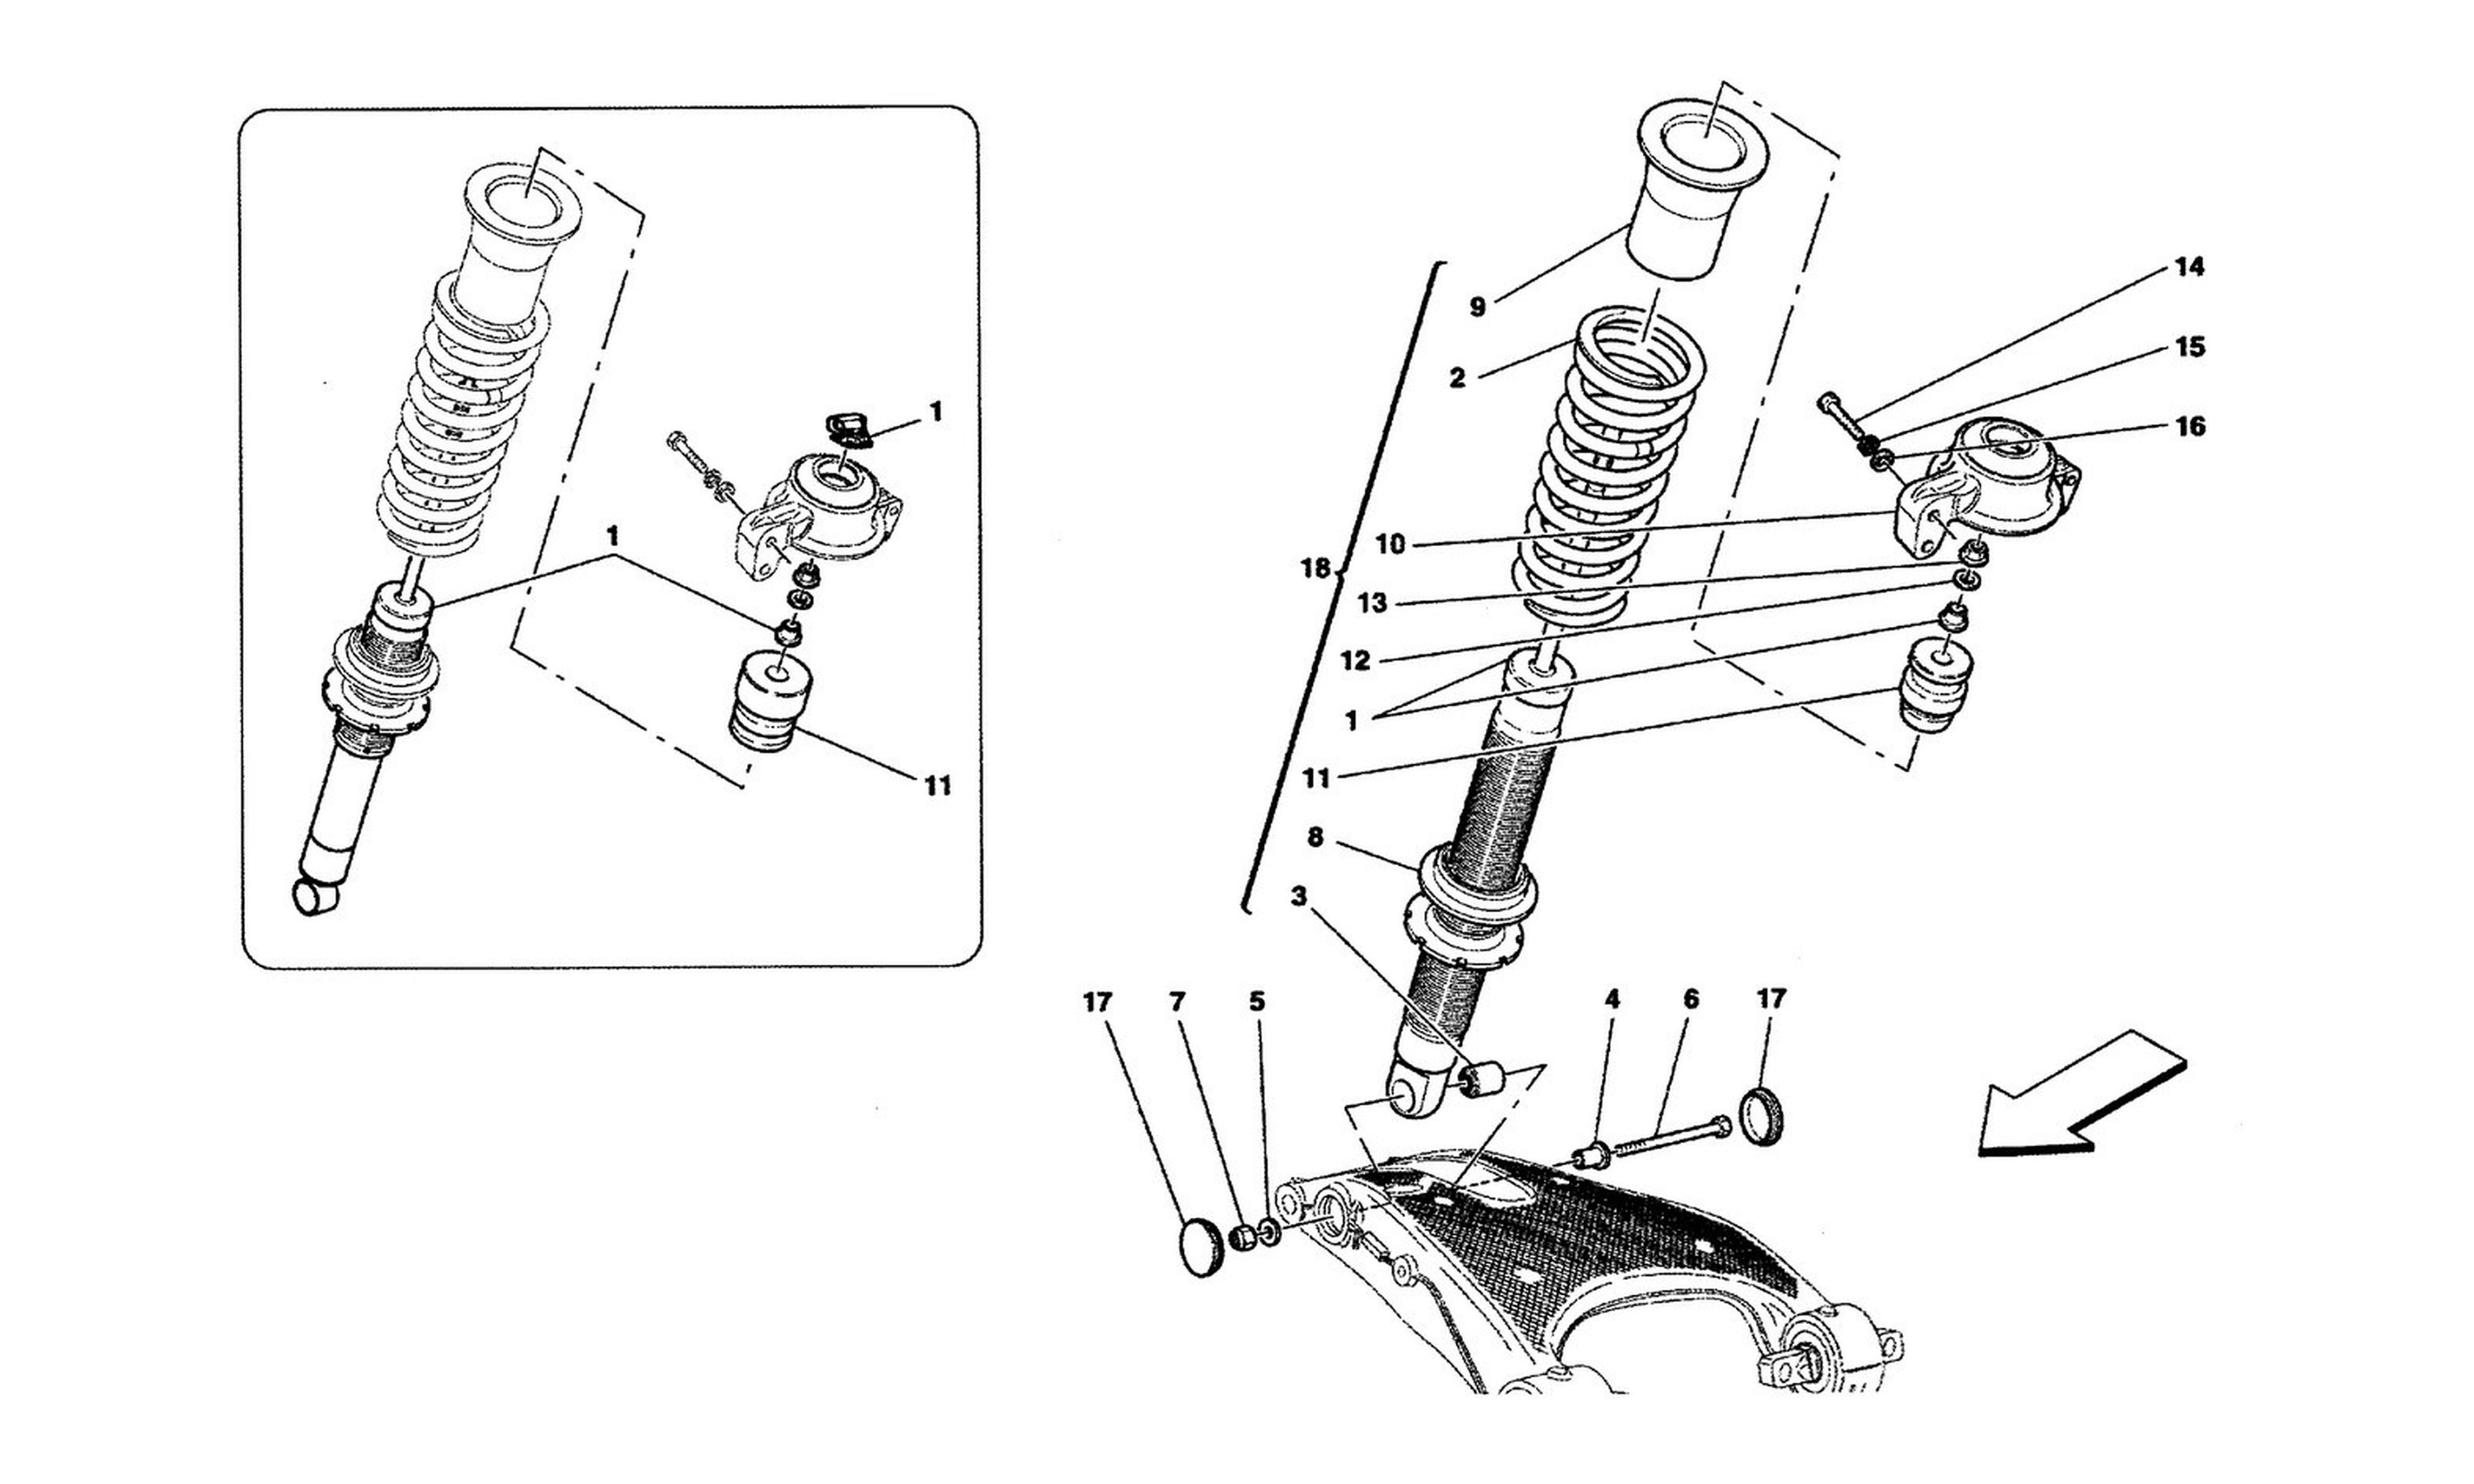 Schematic: Rear Shock Absorber Devices